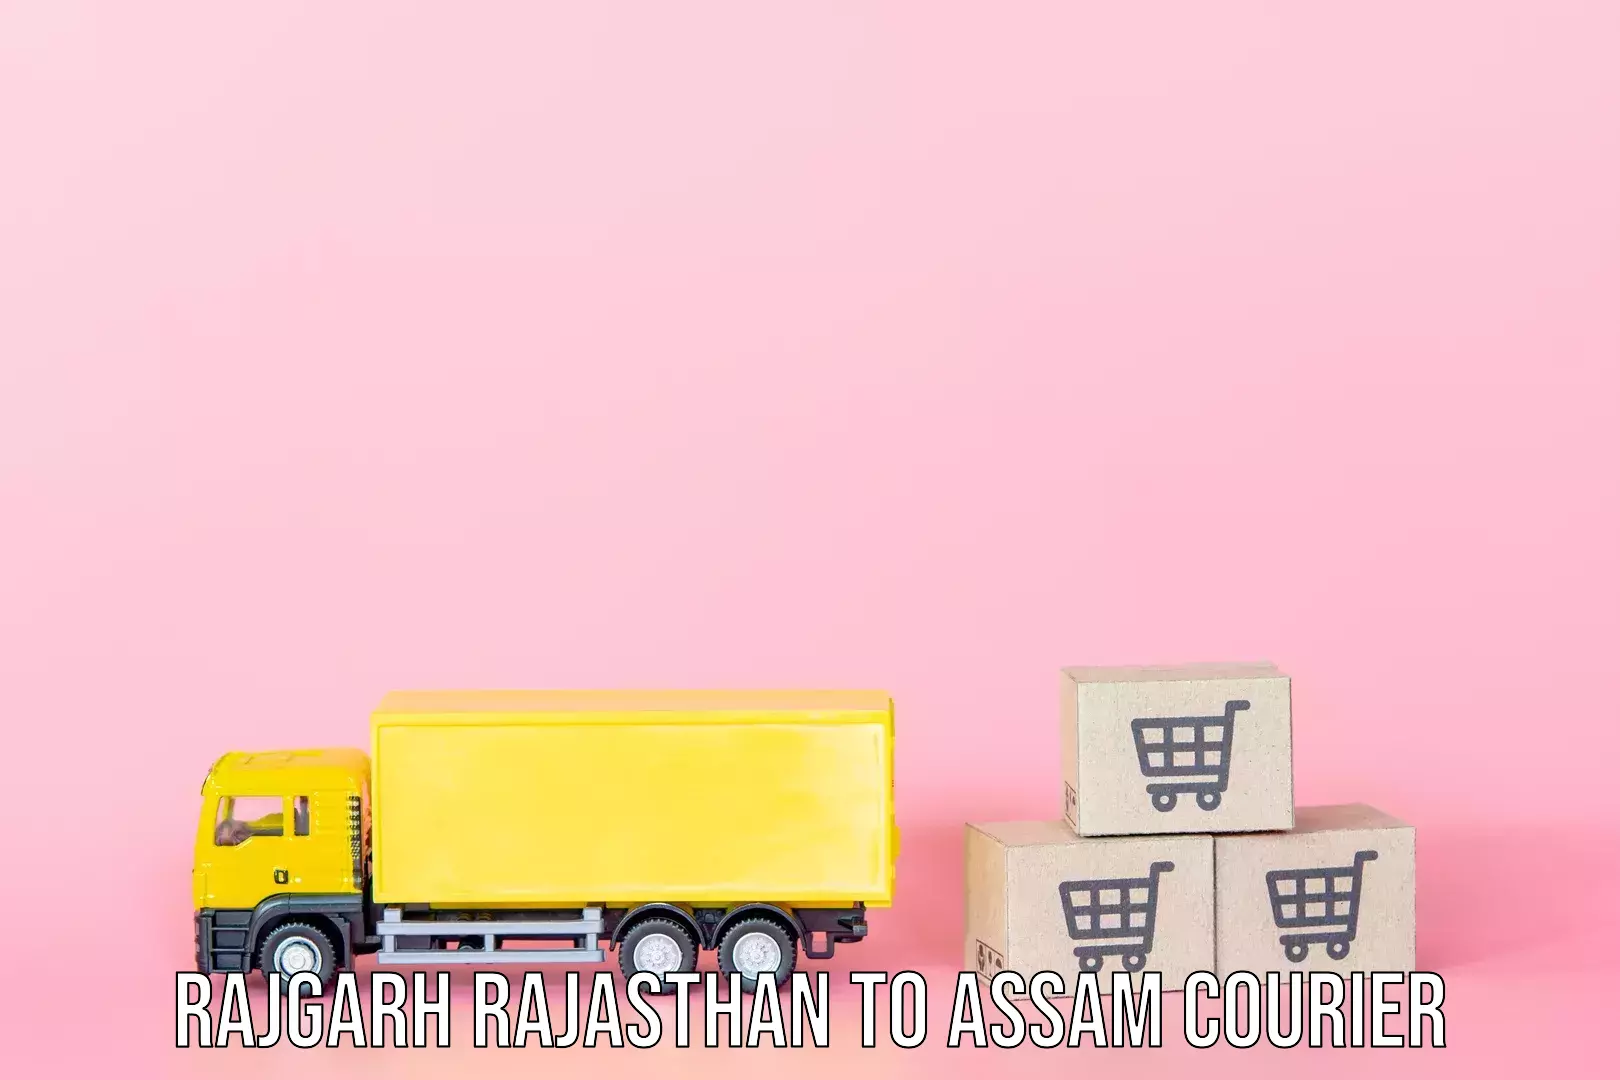 Baggage relocation service Rajgarh Rajasthan to Assam